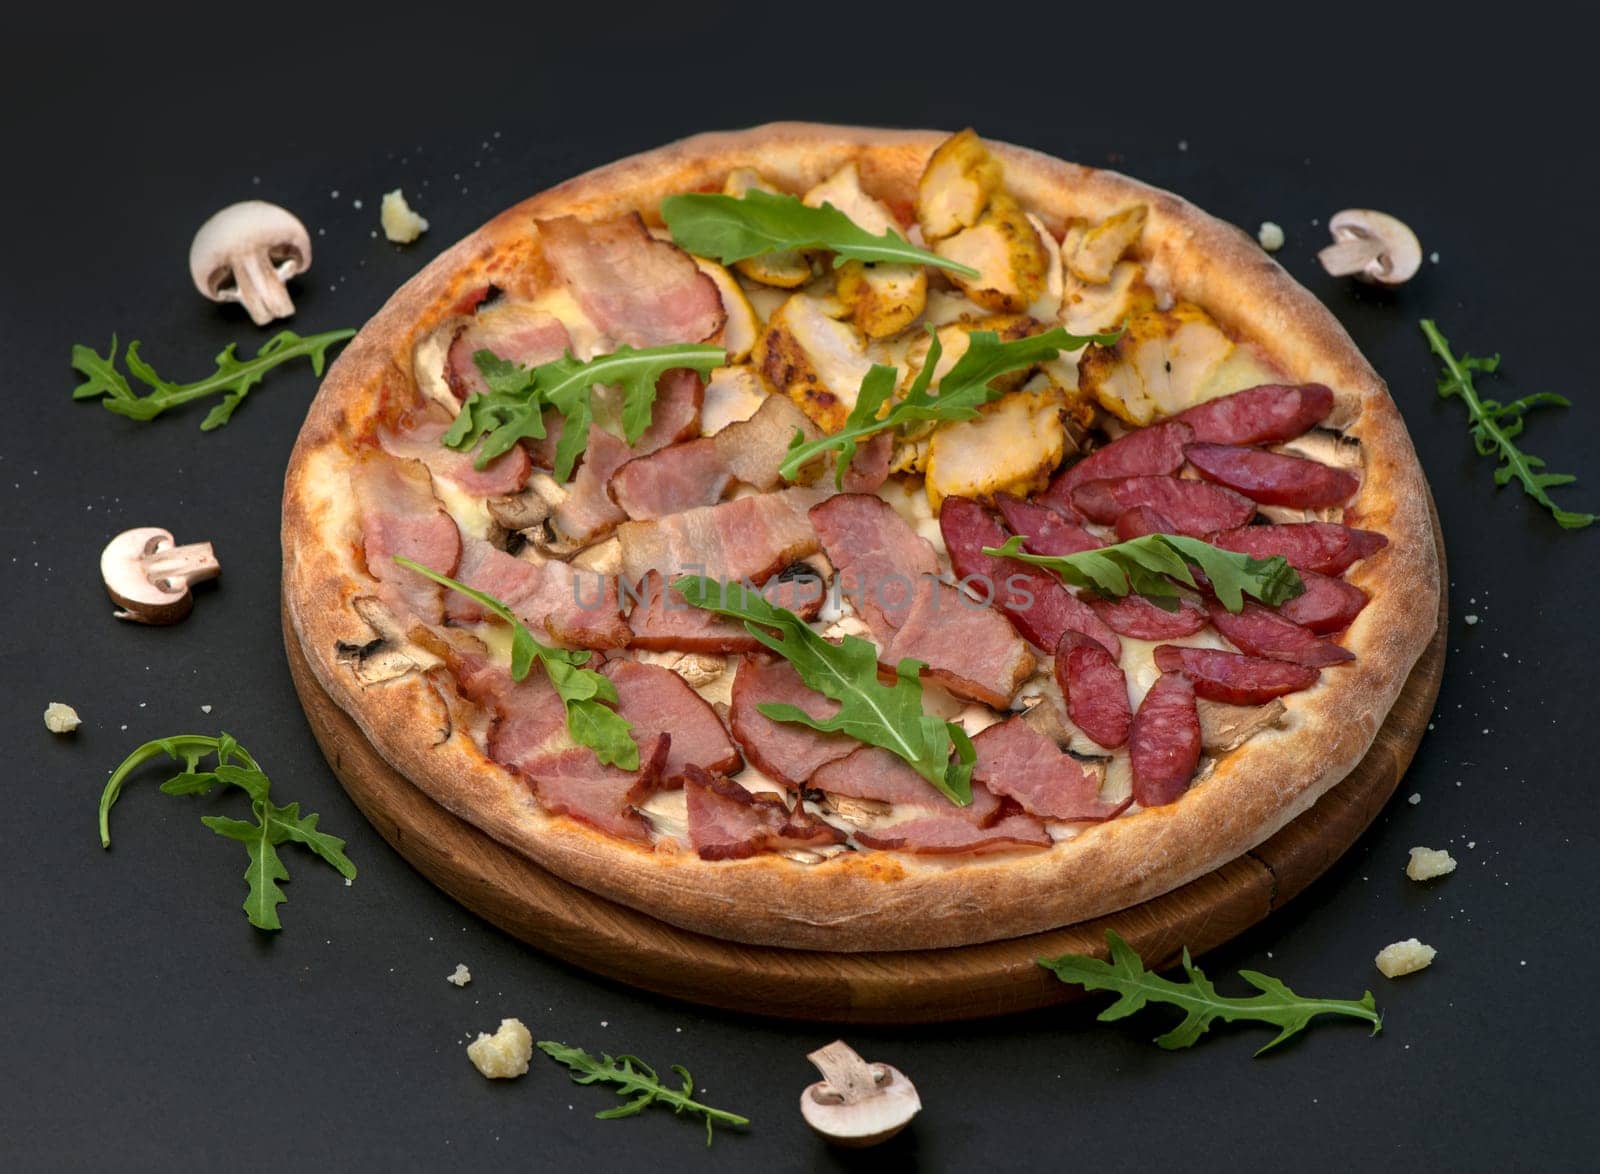 Traditional Italian pizza with ham, cheese and arugula on a dark background by aprilphoto